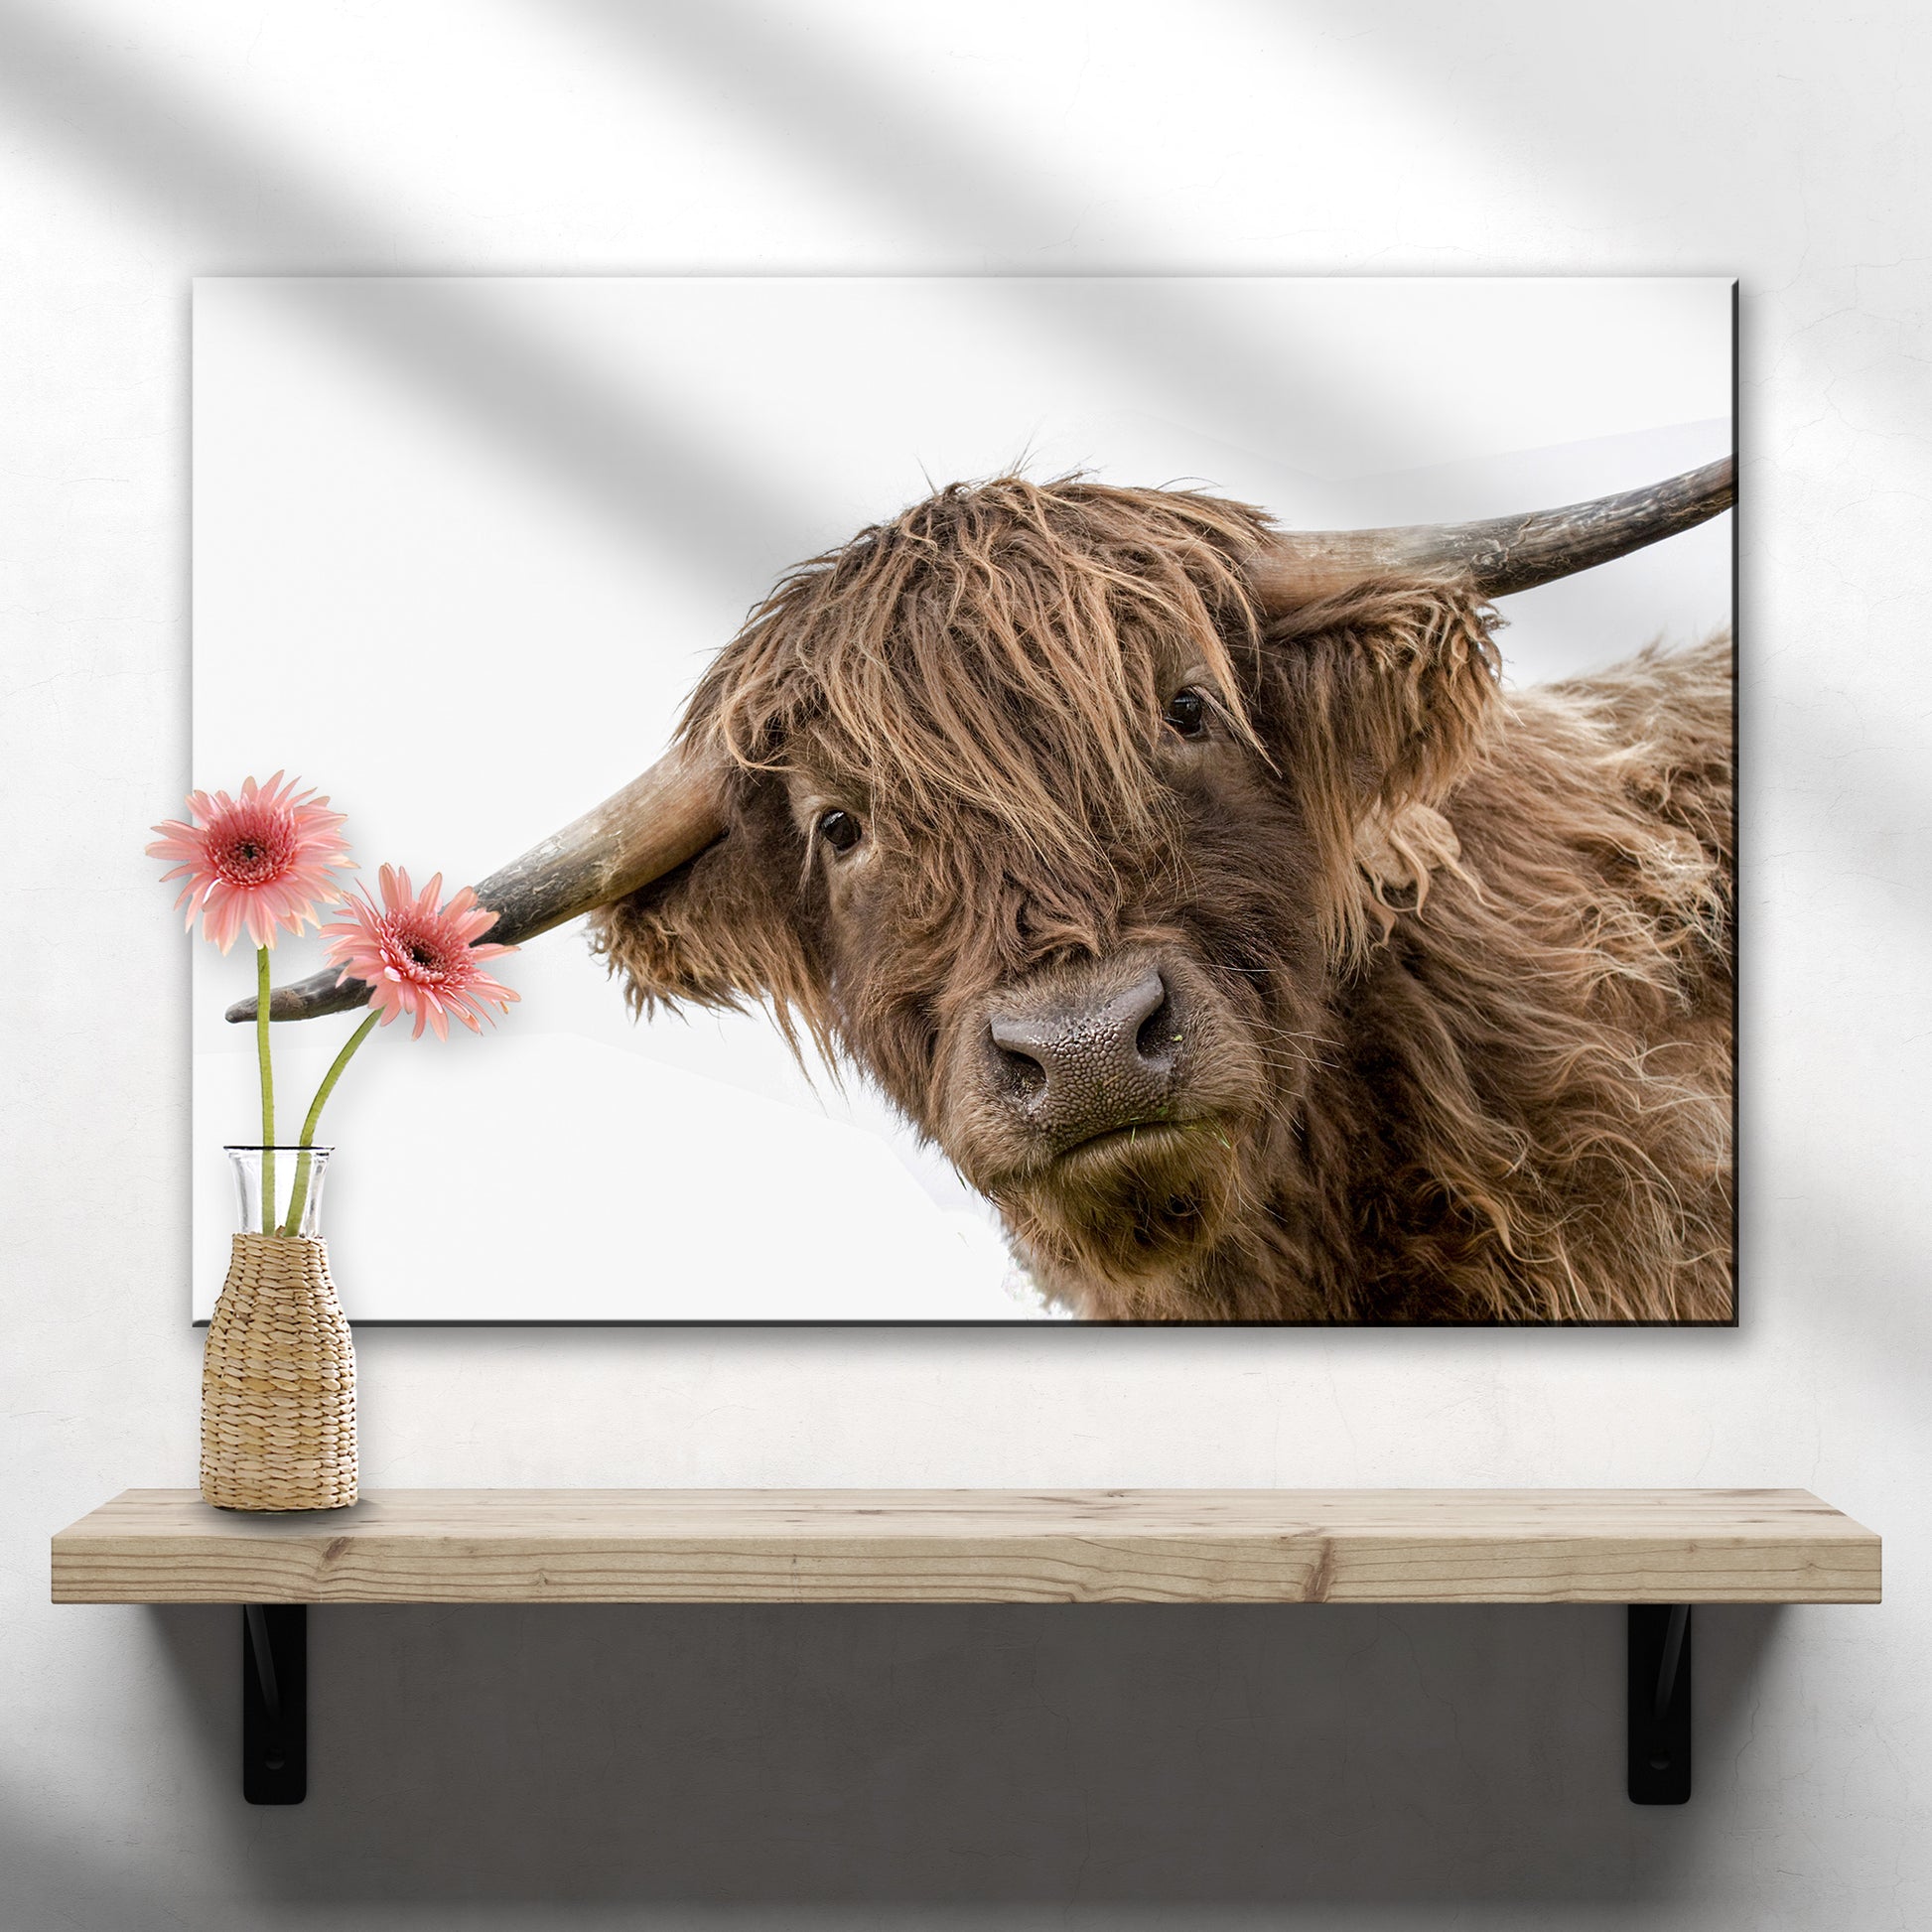 Curious Highland Cow Canvas Wall Art - Image by Tailored Canvases